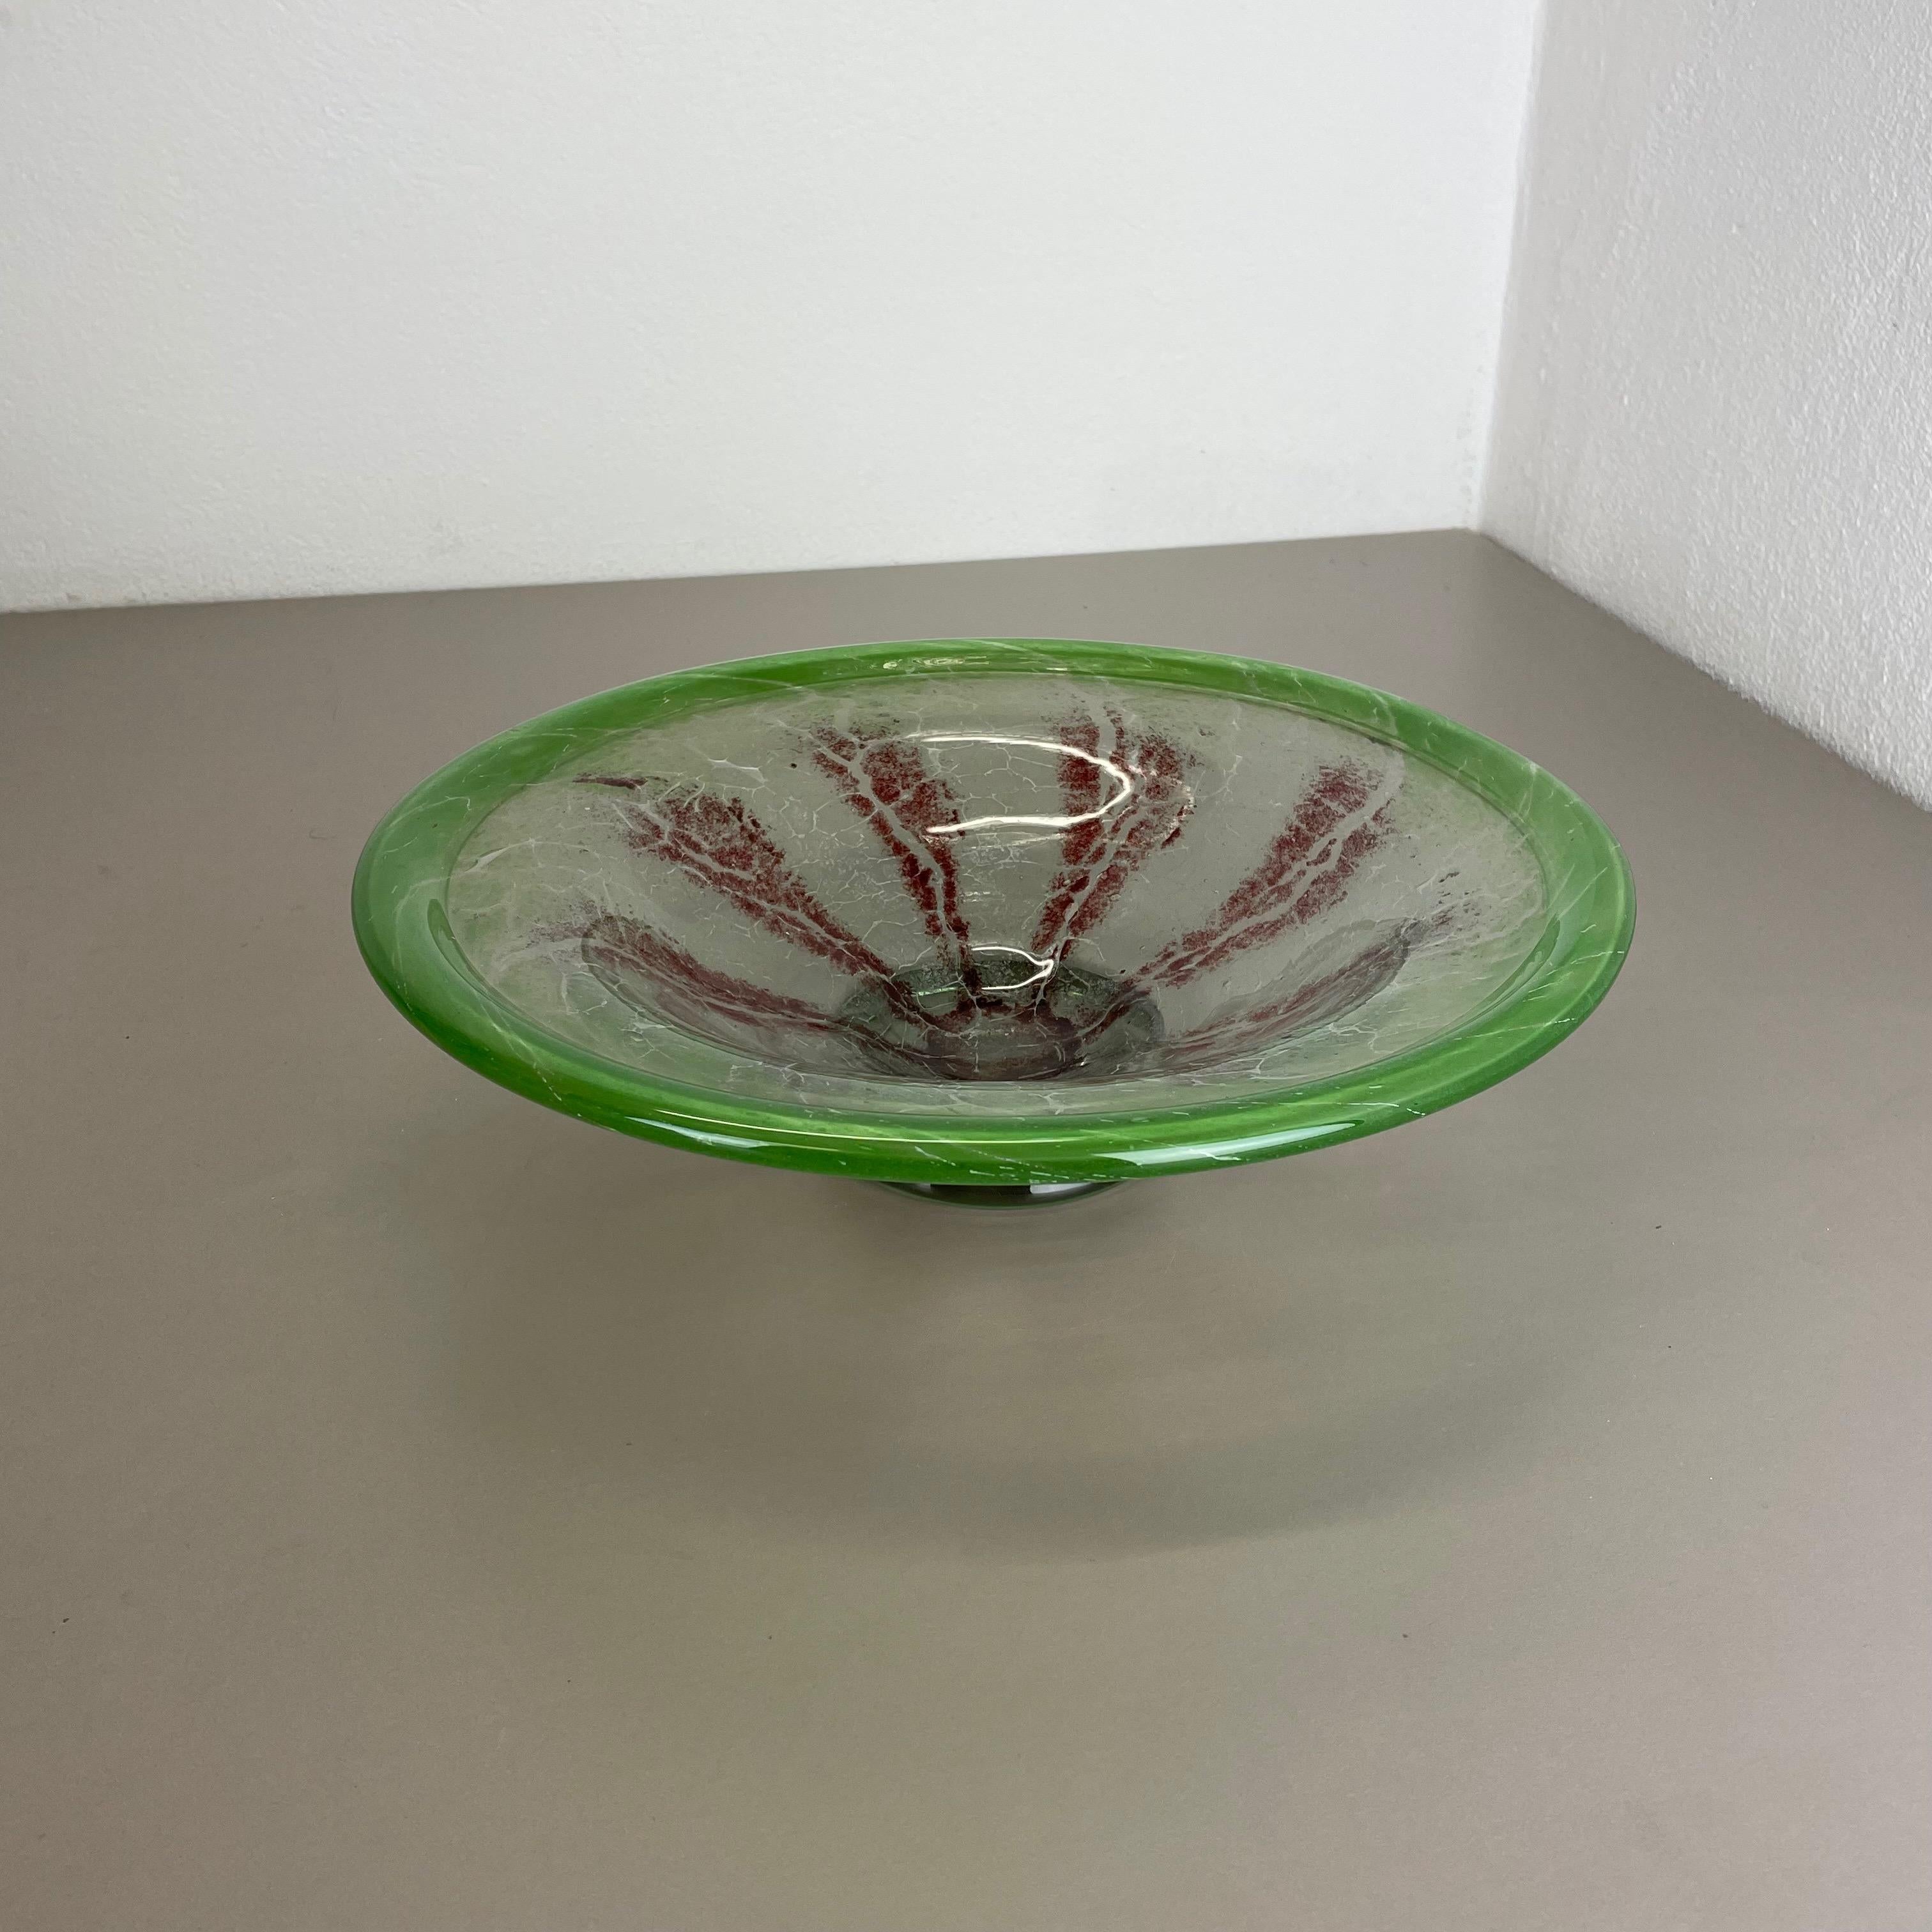 Large Baushaus Art Deco Glass Bowl by Karl Wiedmann for WMF Ikora, Germany 1930s In Good Condition For Sale In Kirchlengern, DE